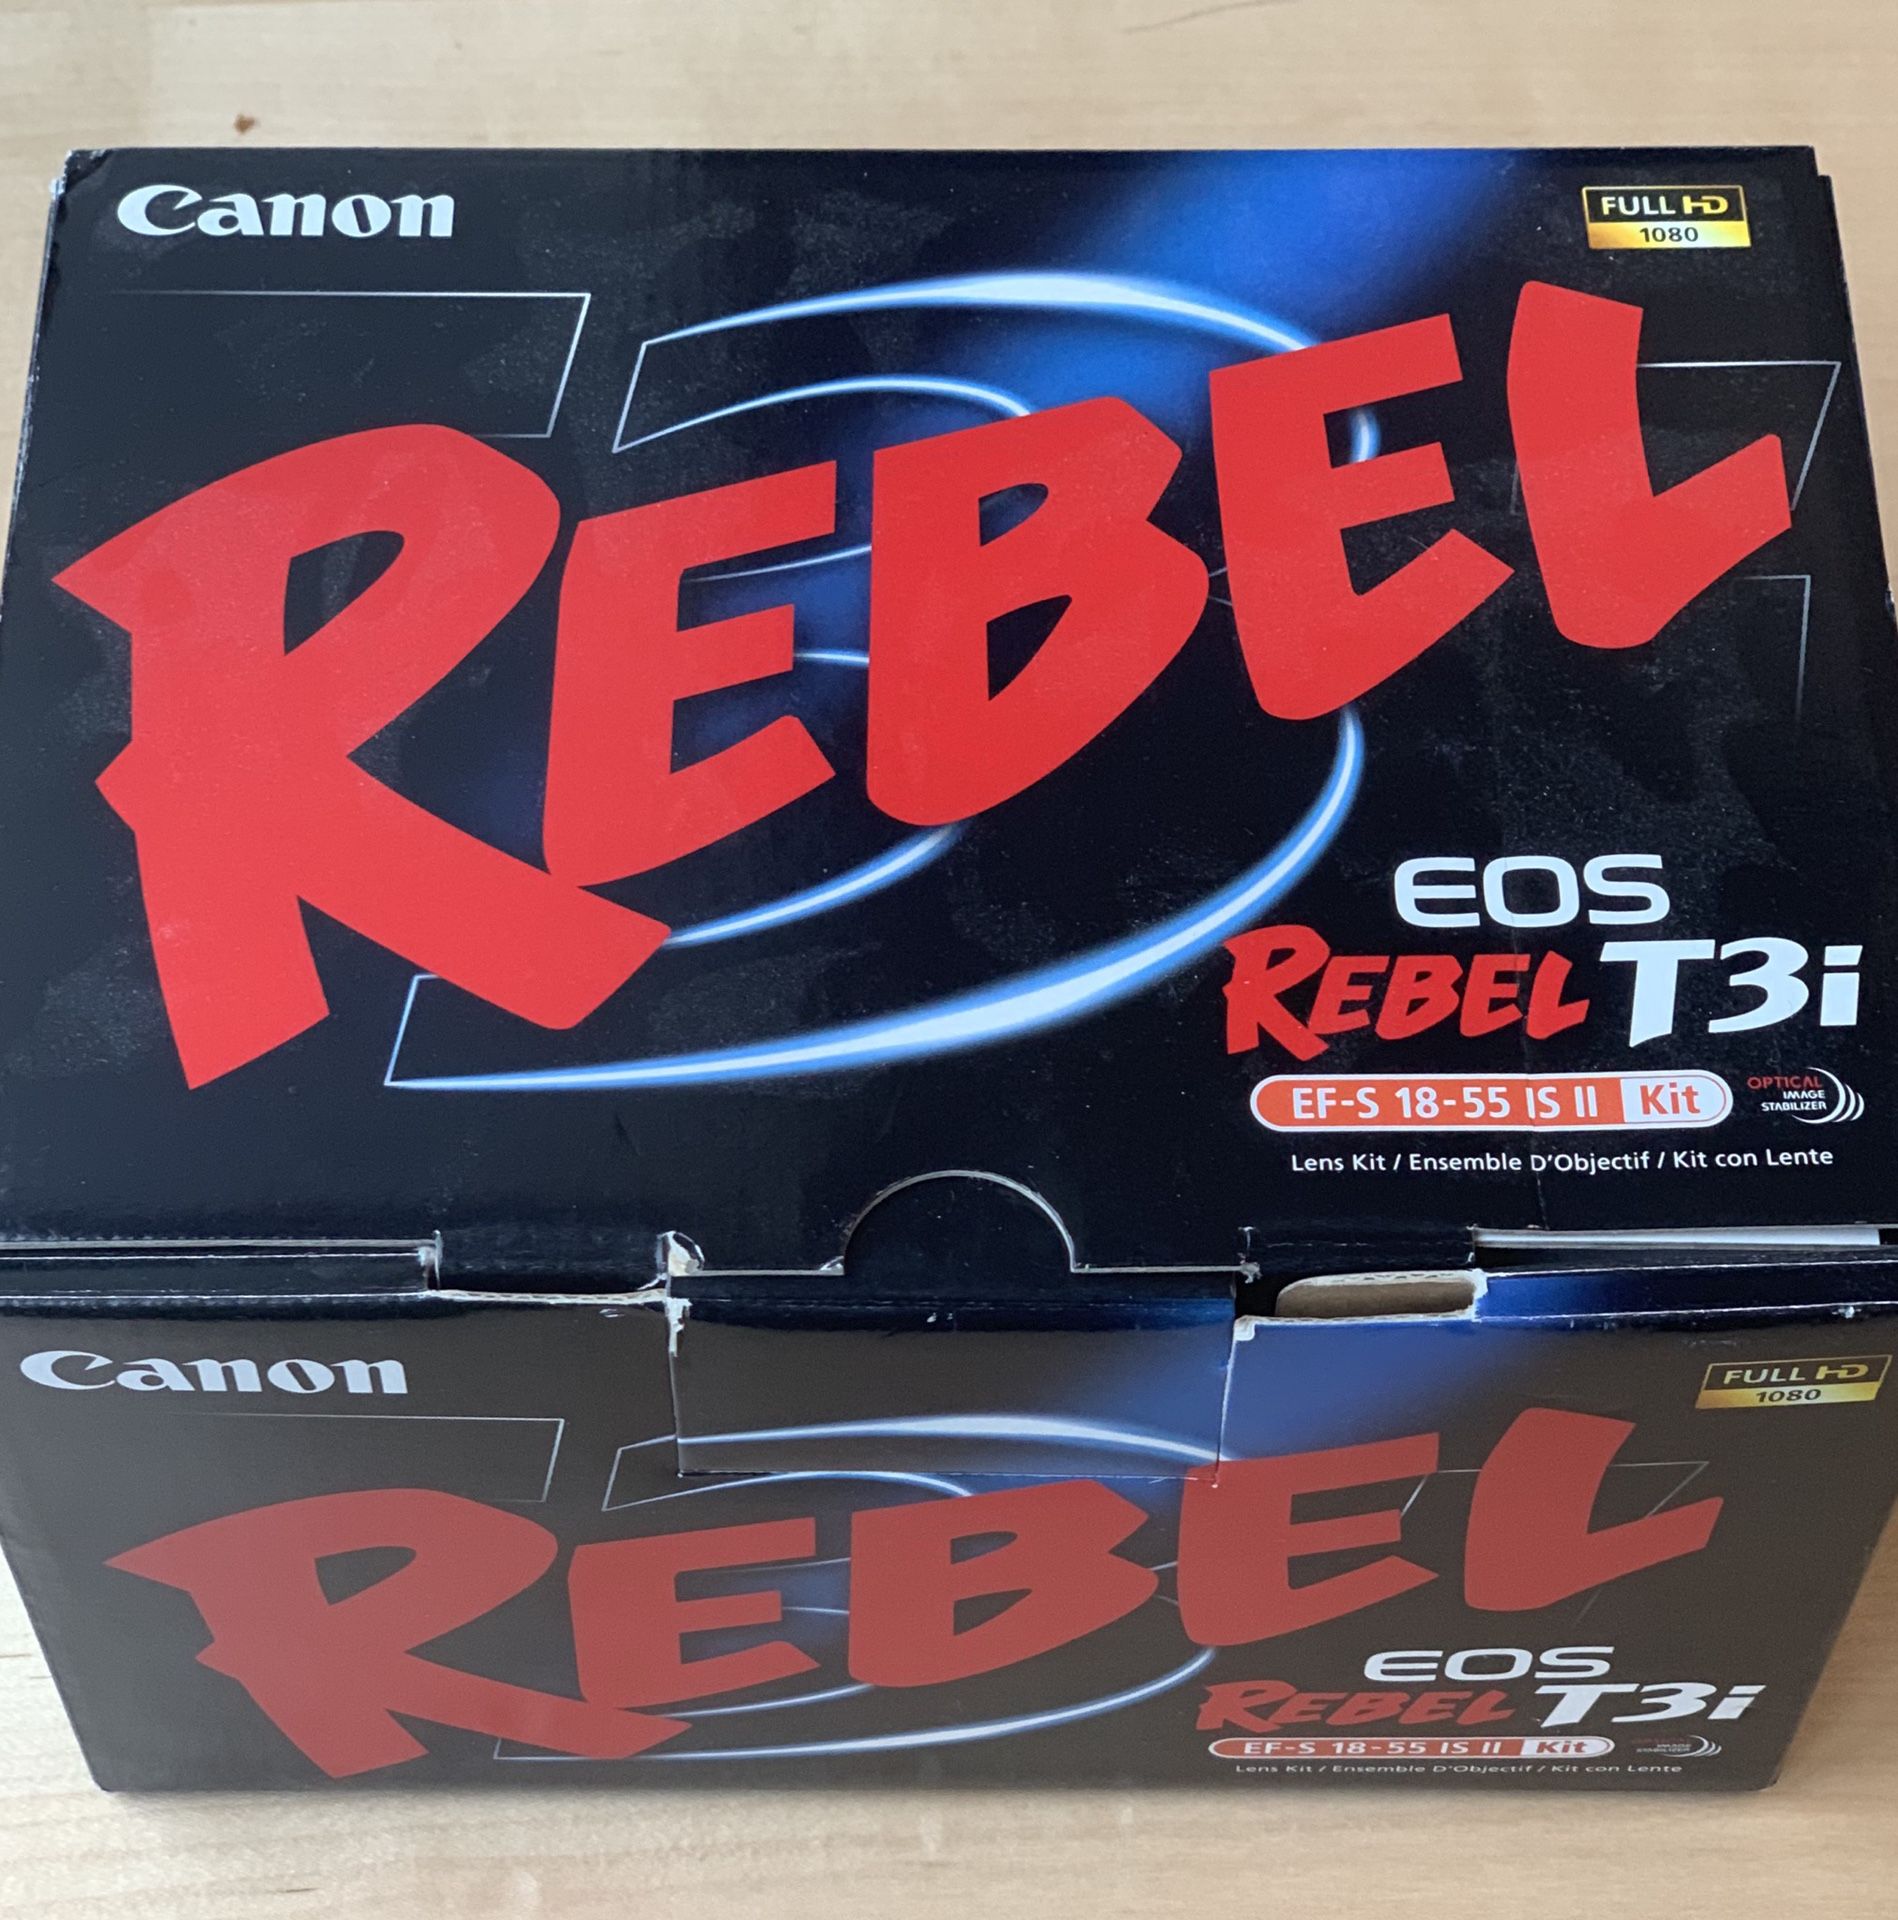 Canon Rebel T3i set (with lens, box, and all other accessories)